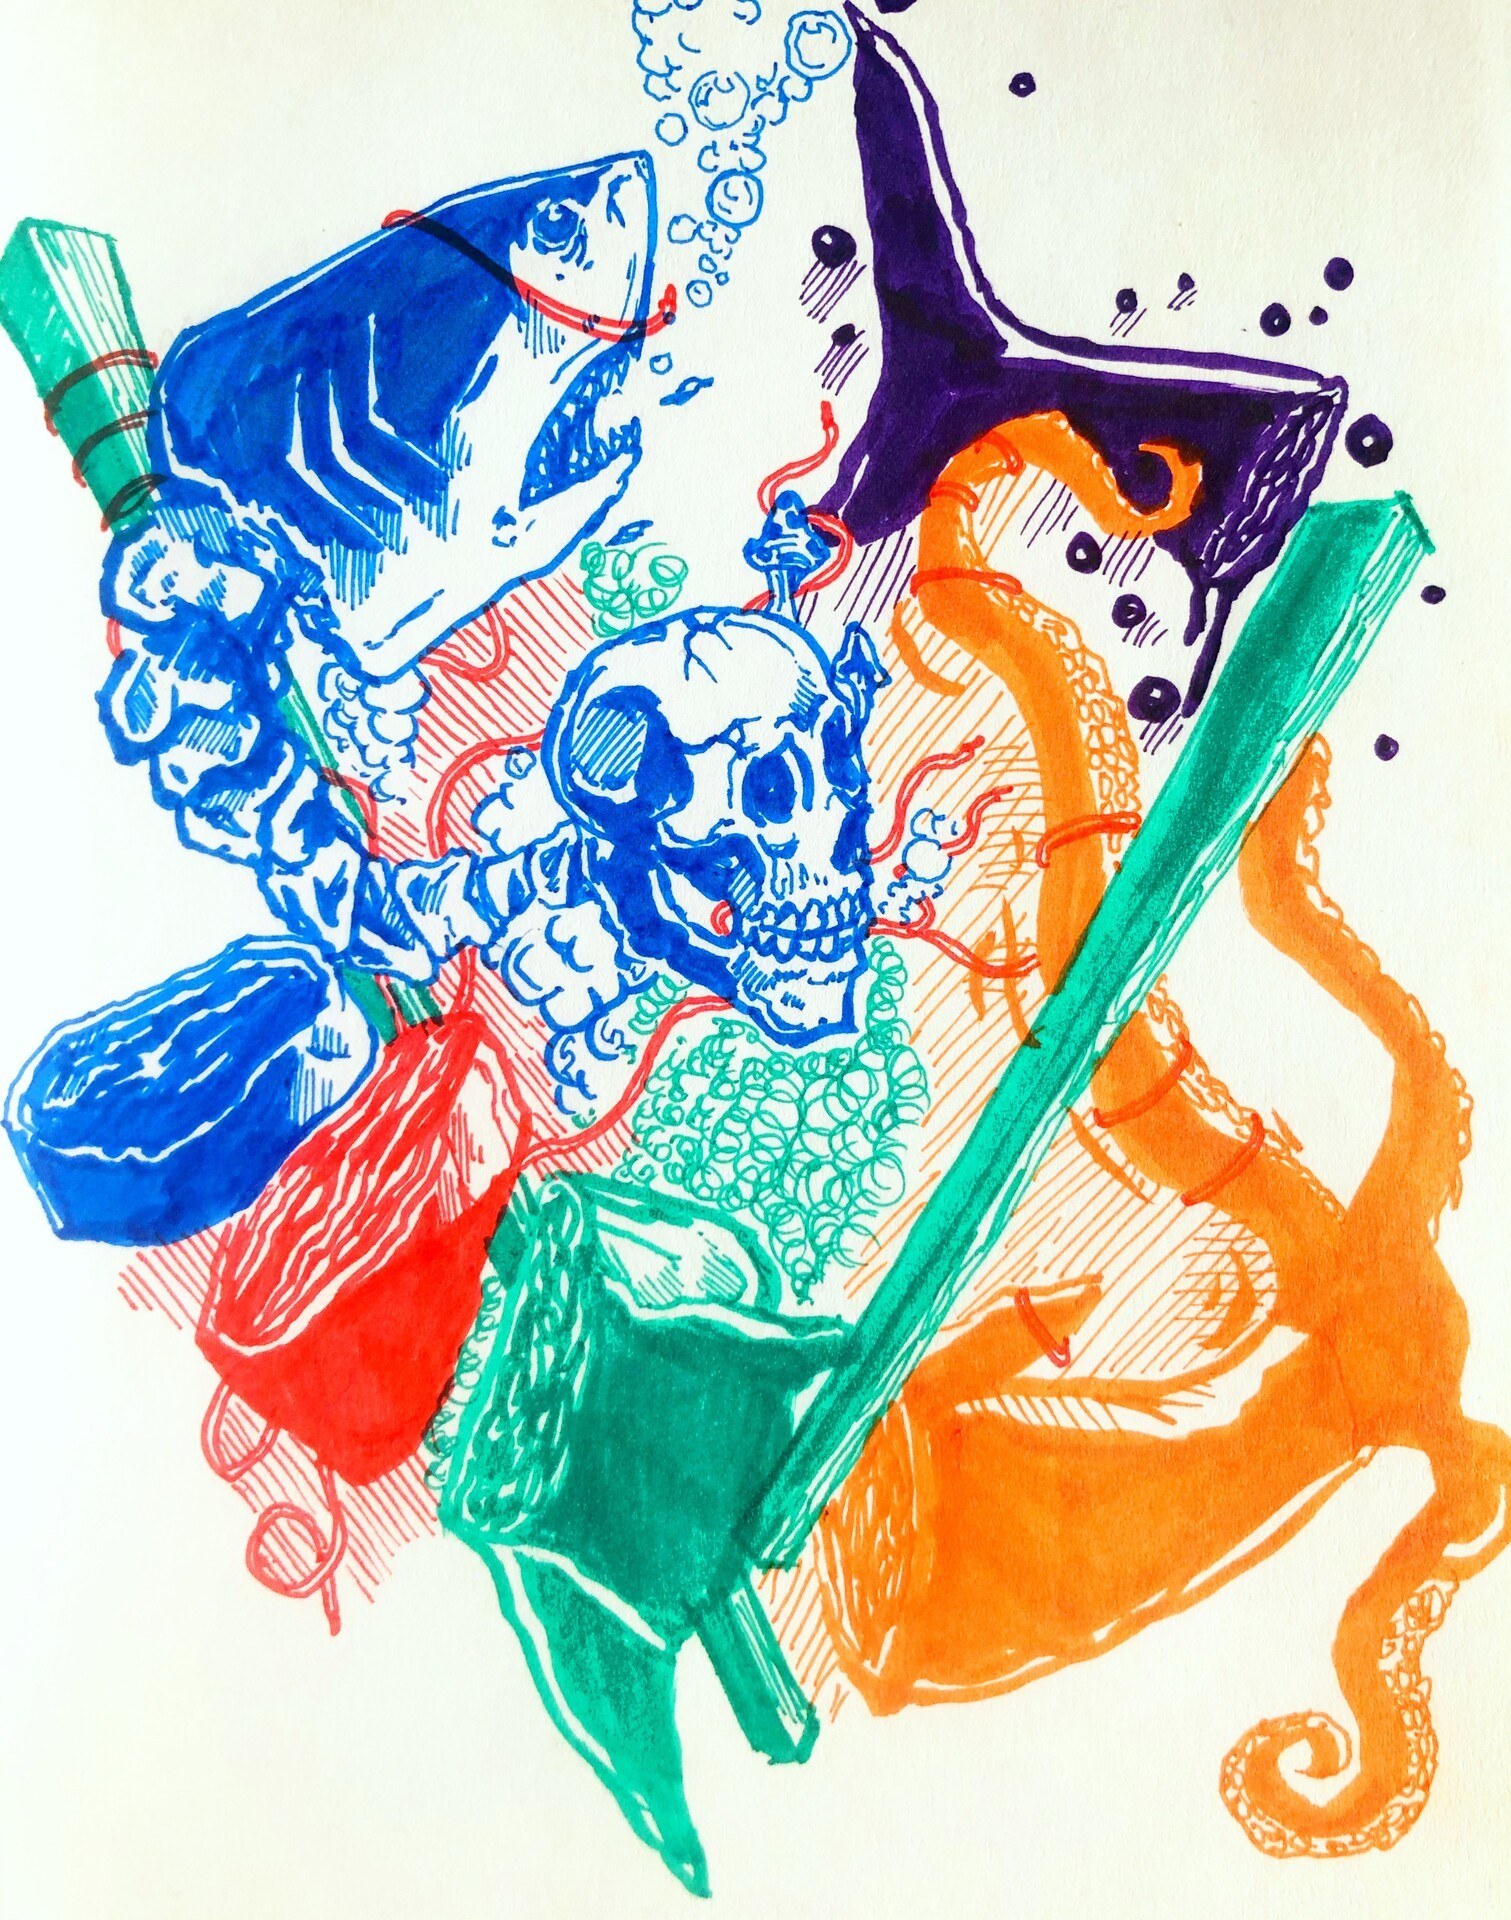 Ink drawing of pieces of sea creatures in blue, purple, green, orange, and red